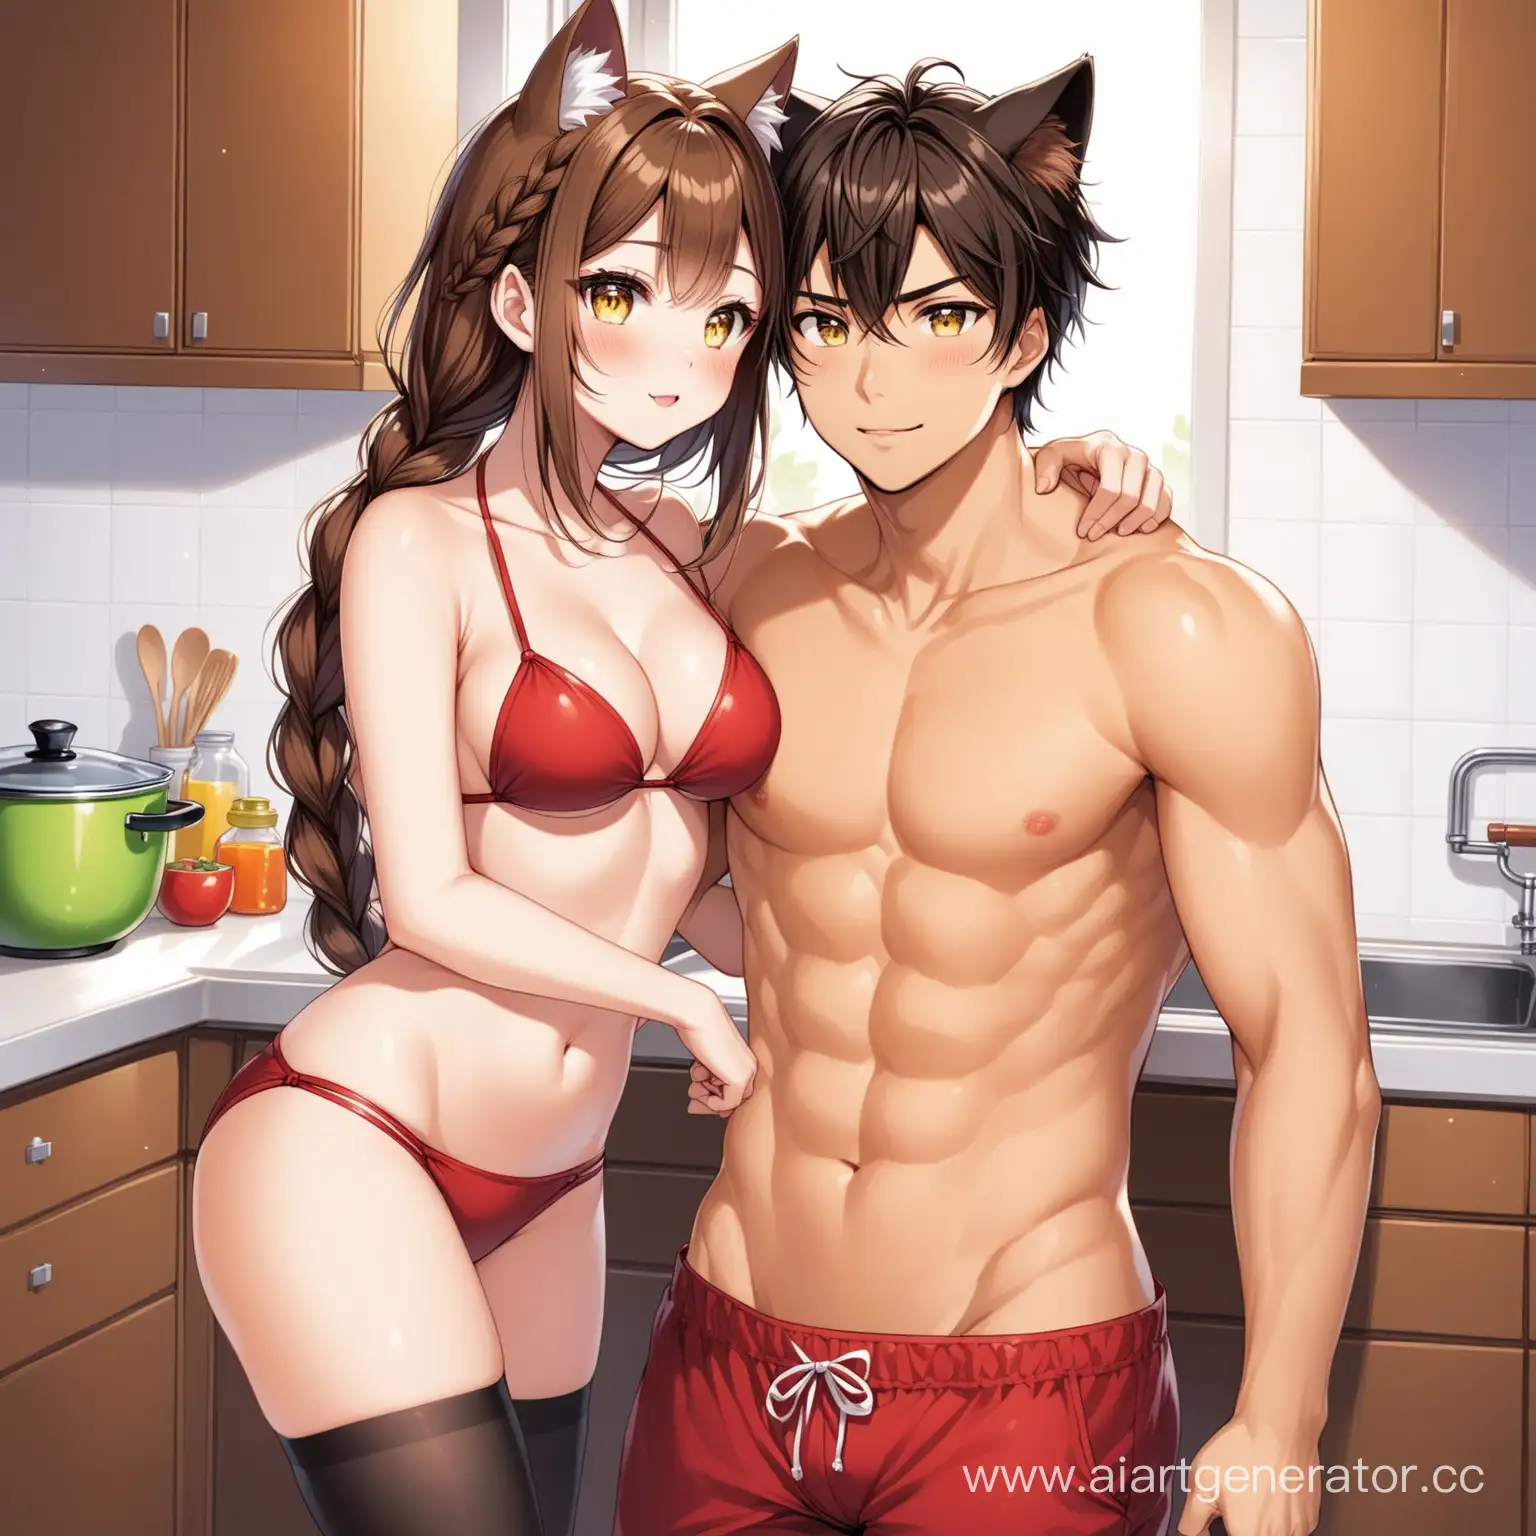 Catgirl yellow eyes brown hair (one short braid), brown cat ears, red bikini, black stockings, and her boyfriend in the kitchen 